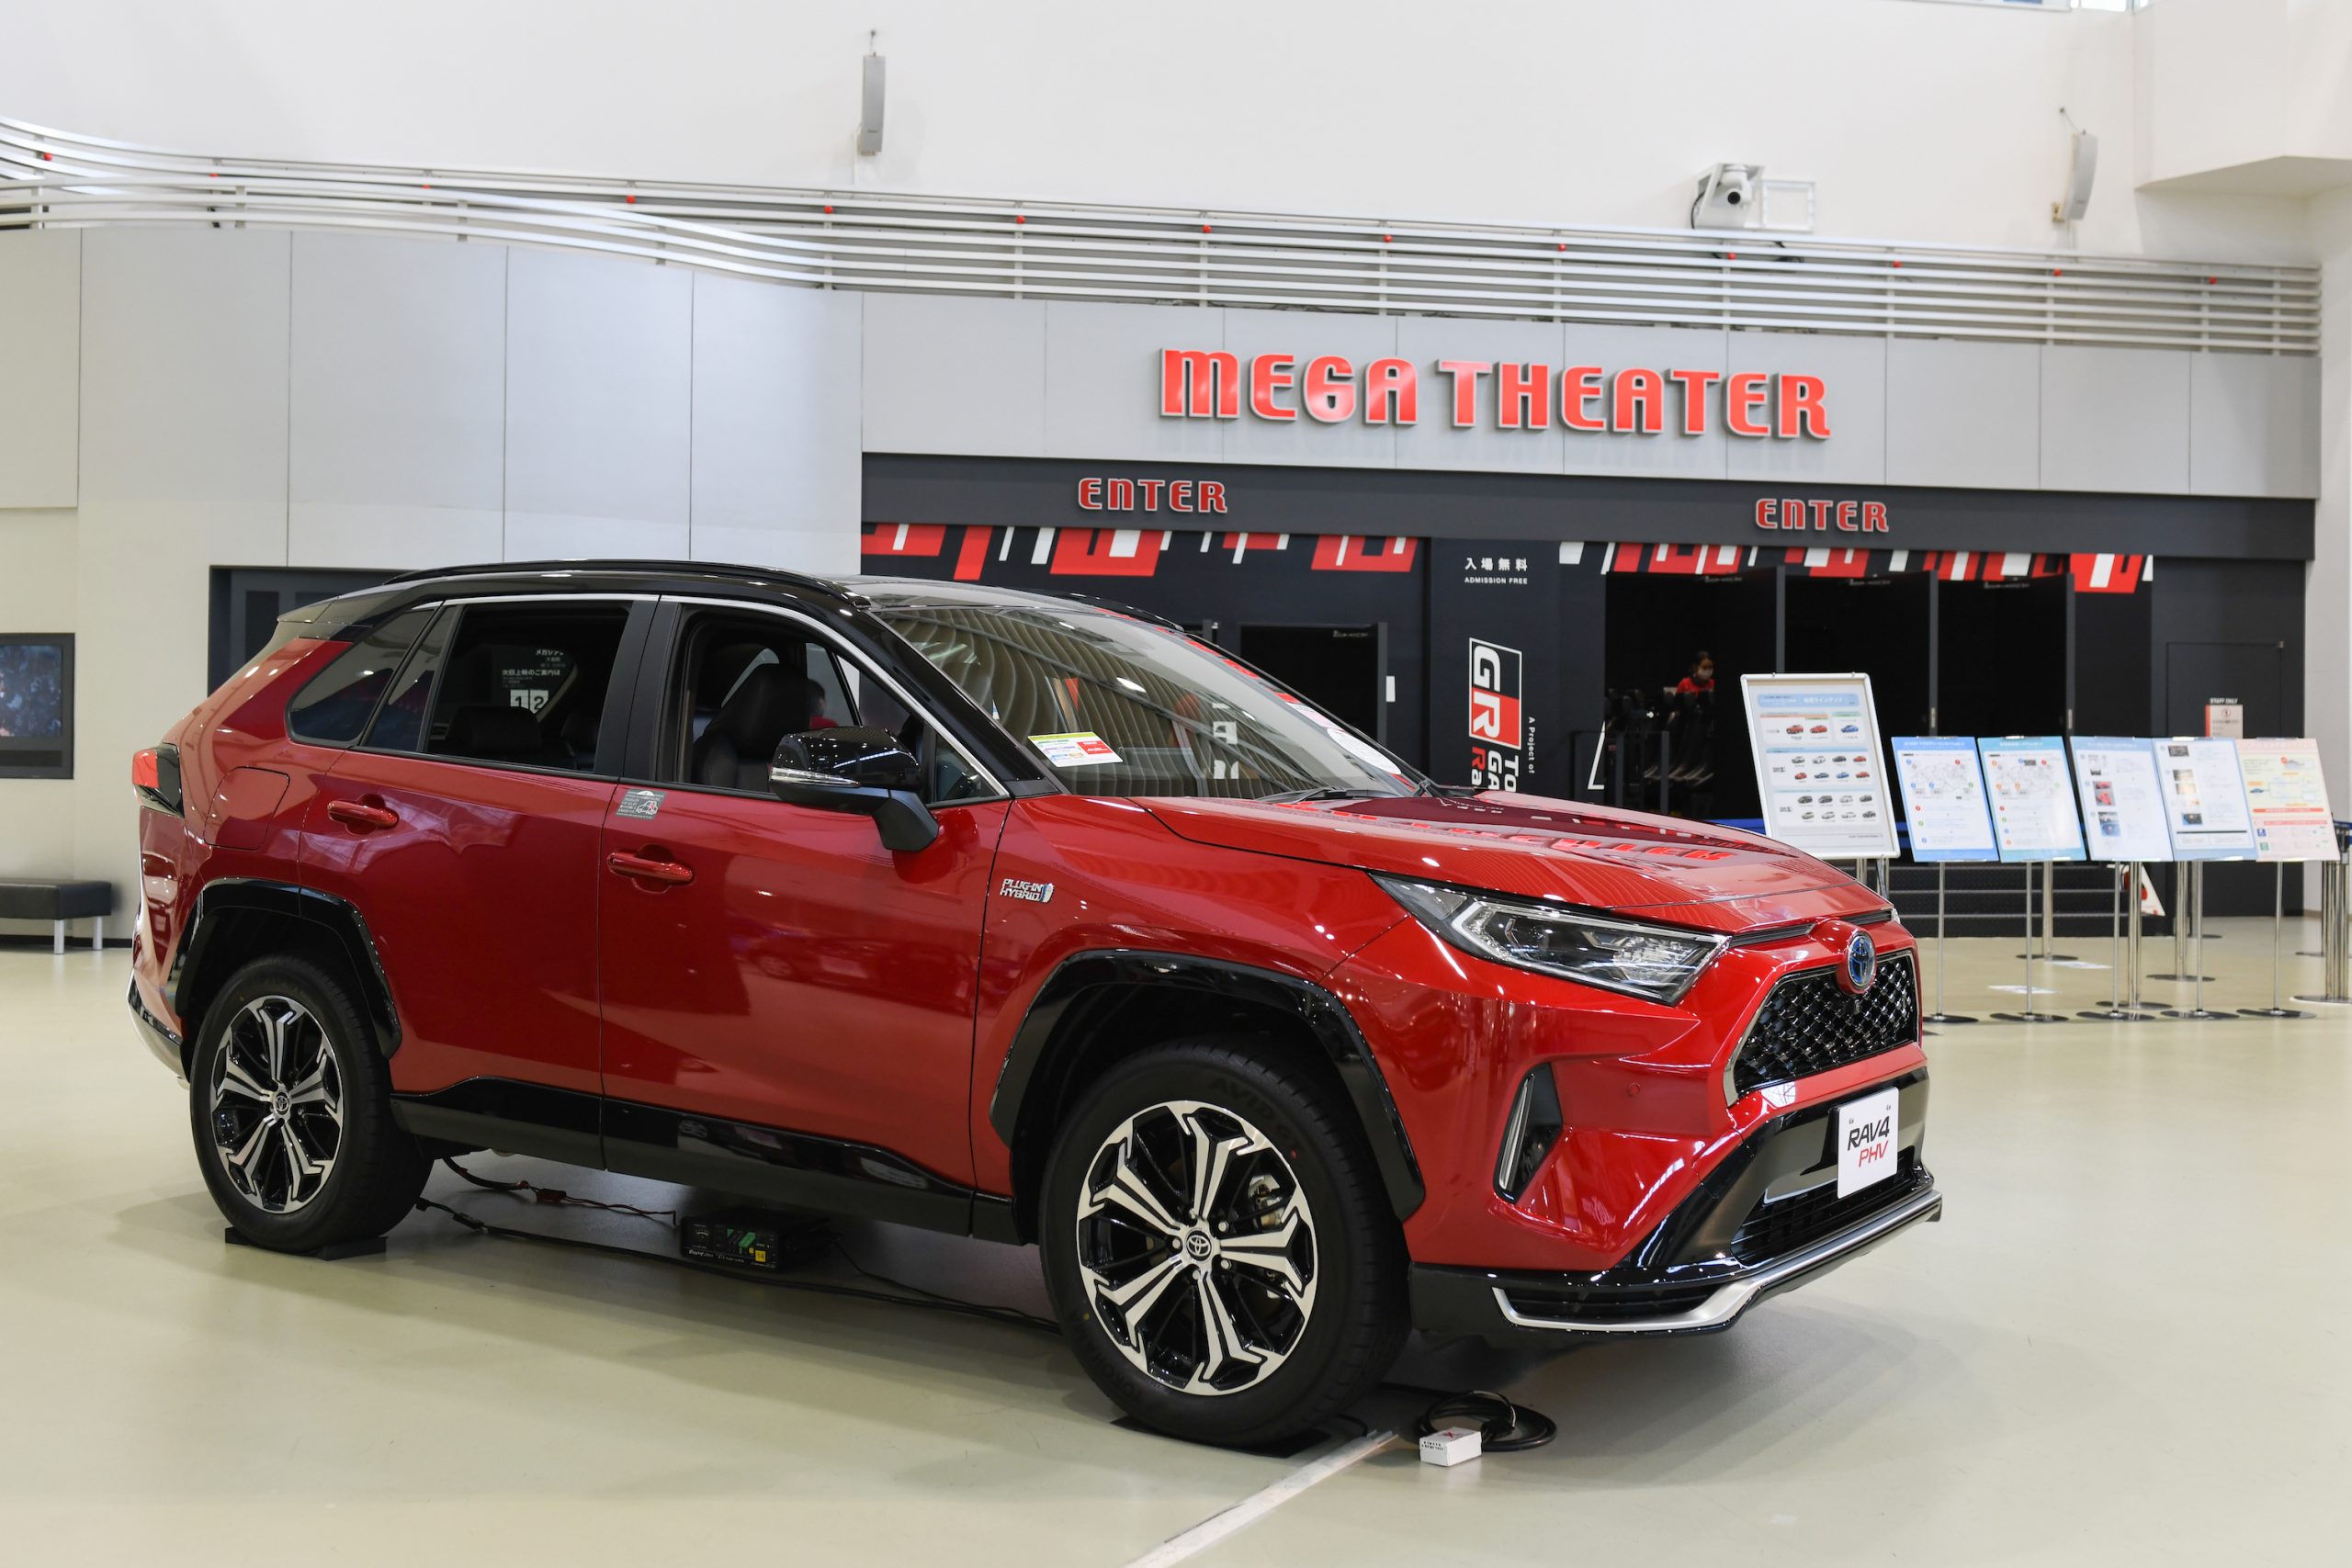 A Toyota Motor Corp. RAV4 plug-in hybrid sports utility vehicle (SUV) stands on display at the Toyota Mega Web showroom